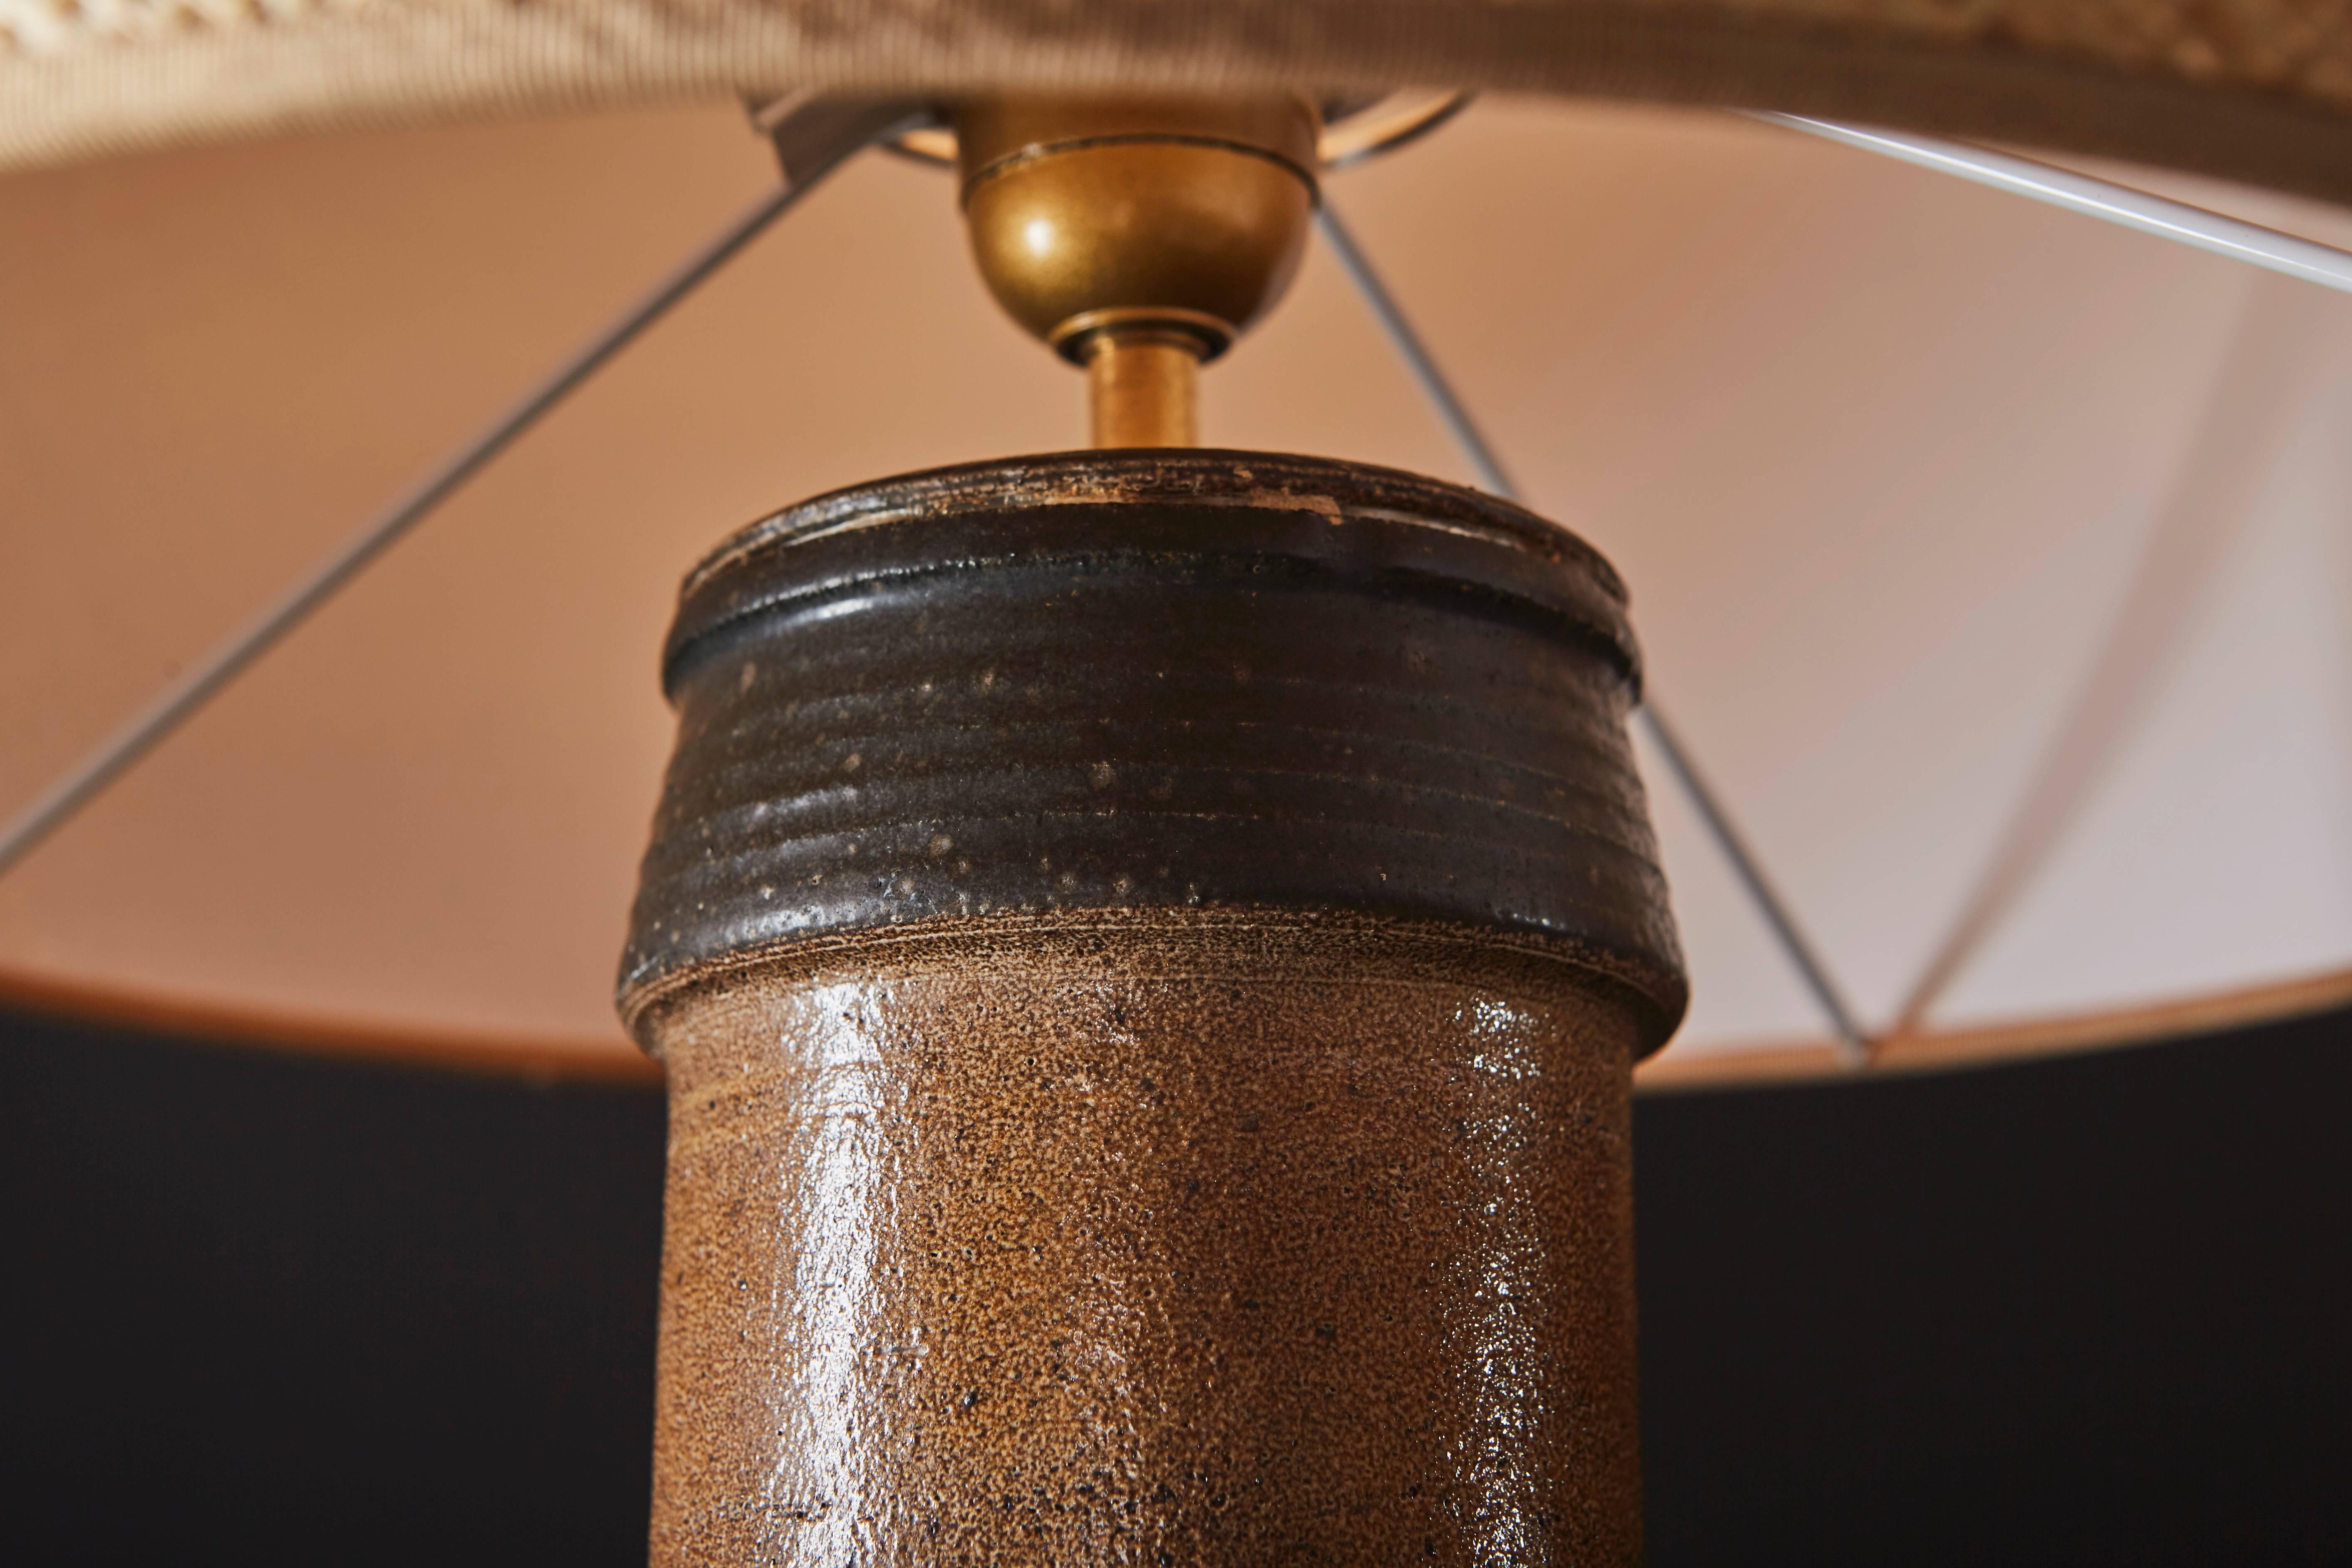 Enameled sandstone lamp. Cylindrical base in dark brown and a narrow neck in light brown.

New shade by Maison Capeline, Paris

Danish work by Kähler, circa 1950.

Lamp without shade is 21.2 in (height) and 5.9 in (diameter).